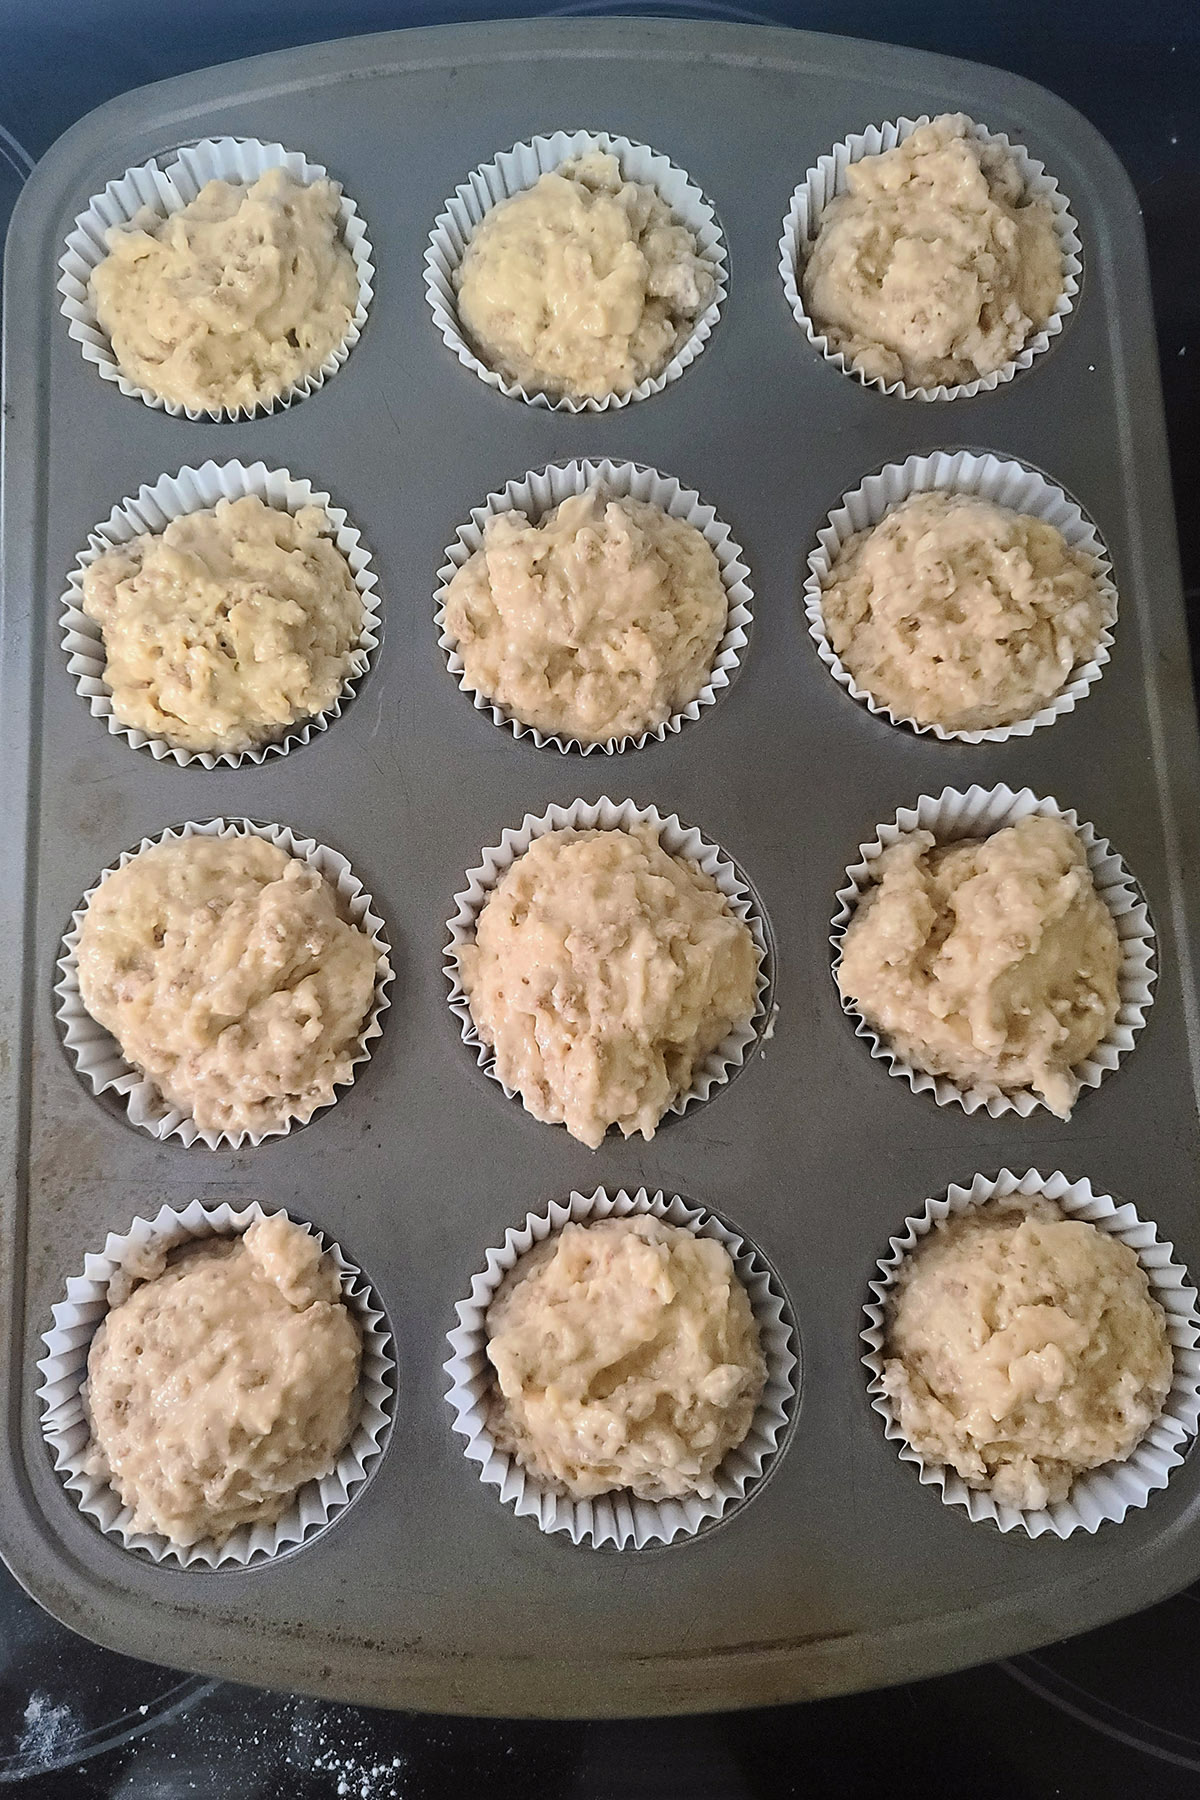 A muffin pan filled with all-bran muffins batter.